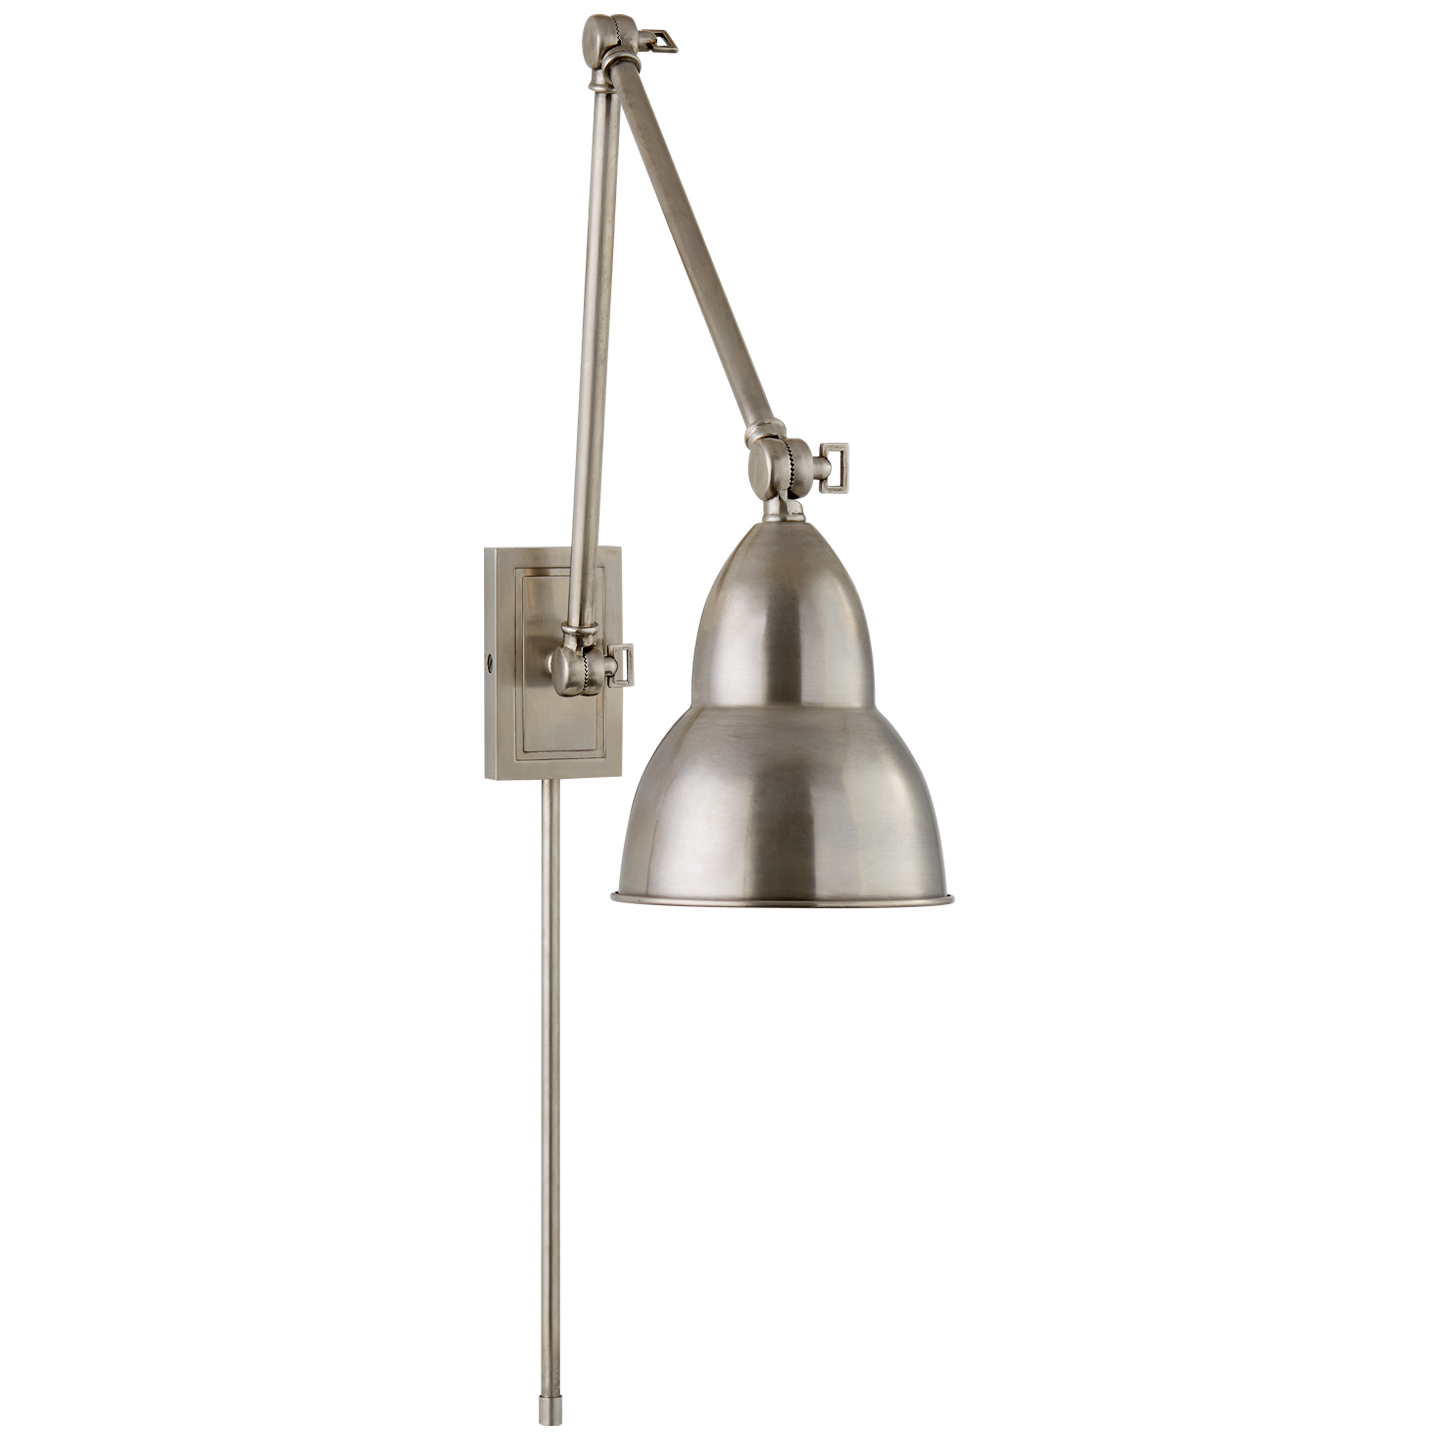 We love the functionality of this French Library Double Arm Wall lamp. Hang in your bedroom, office, or other area that needs extra light.   Designer: Studio VC